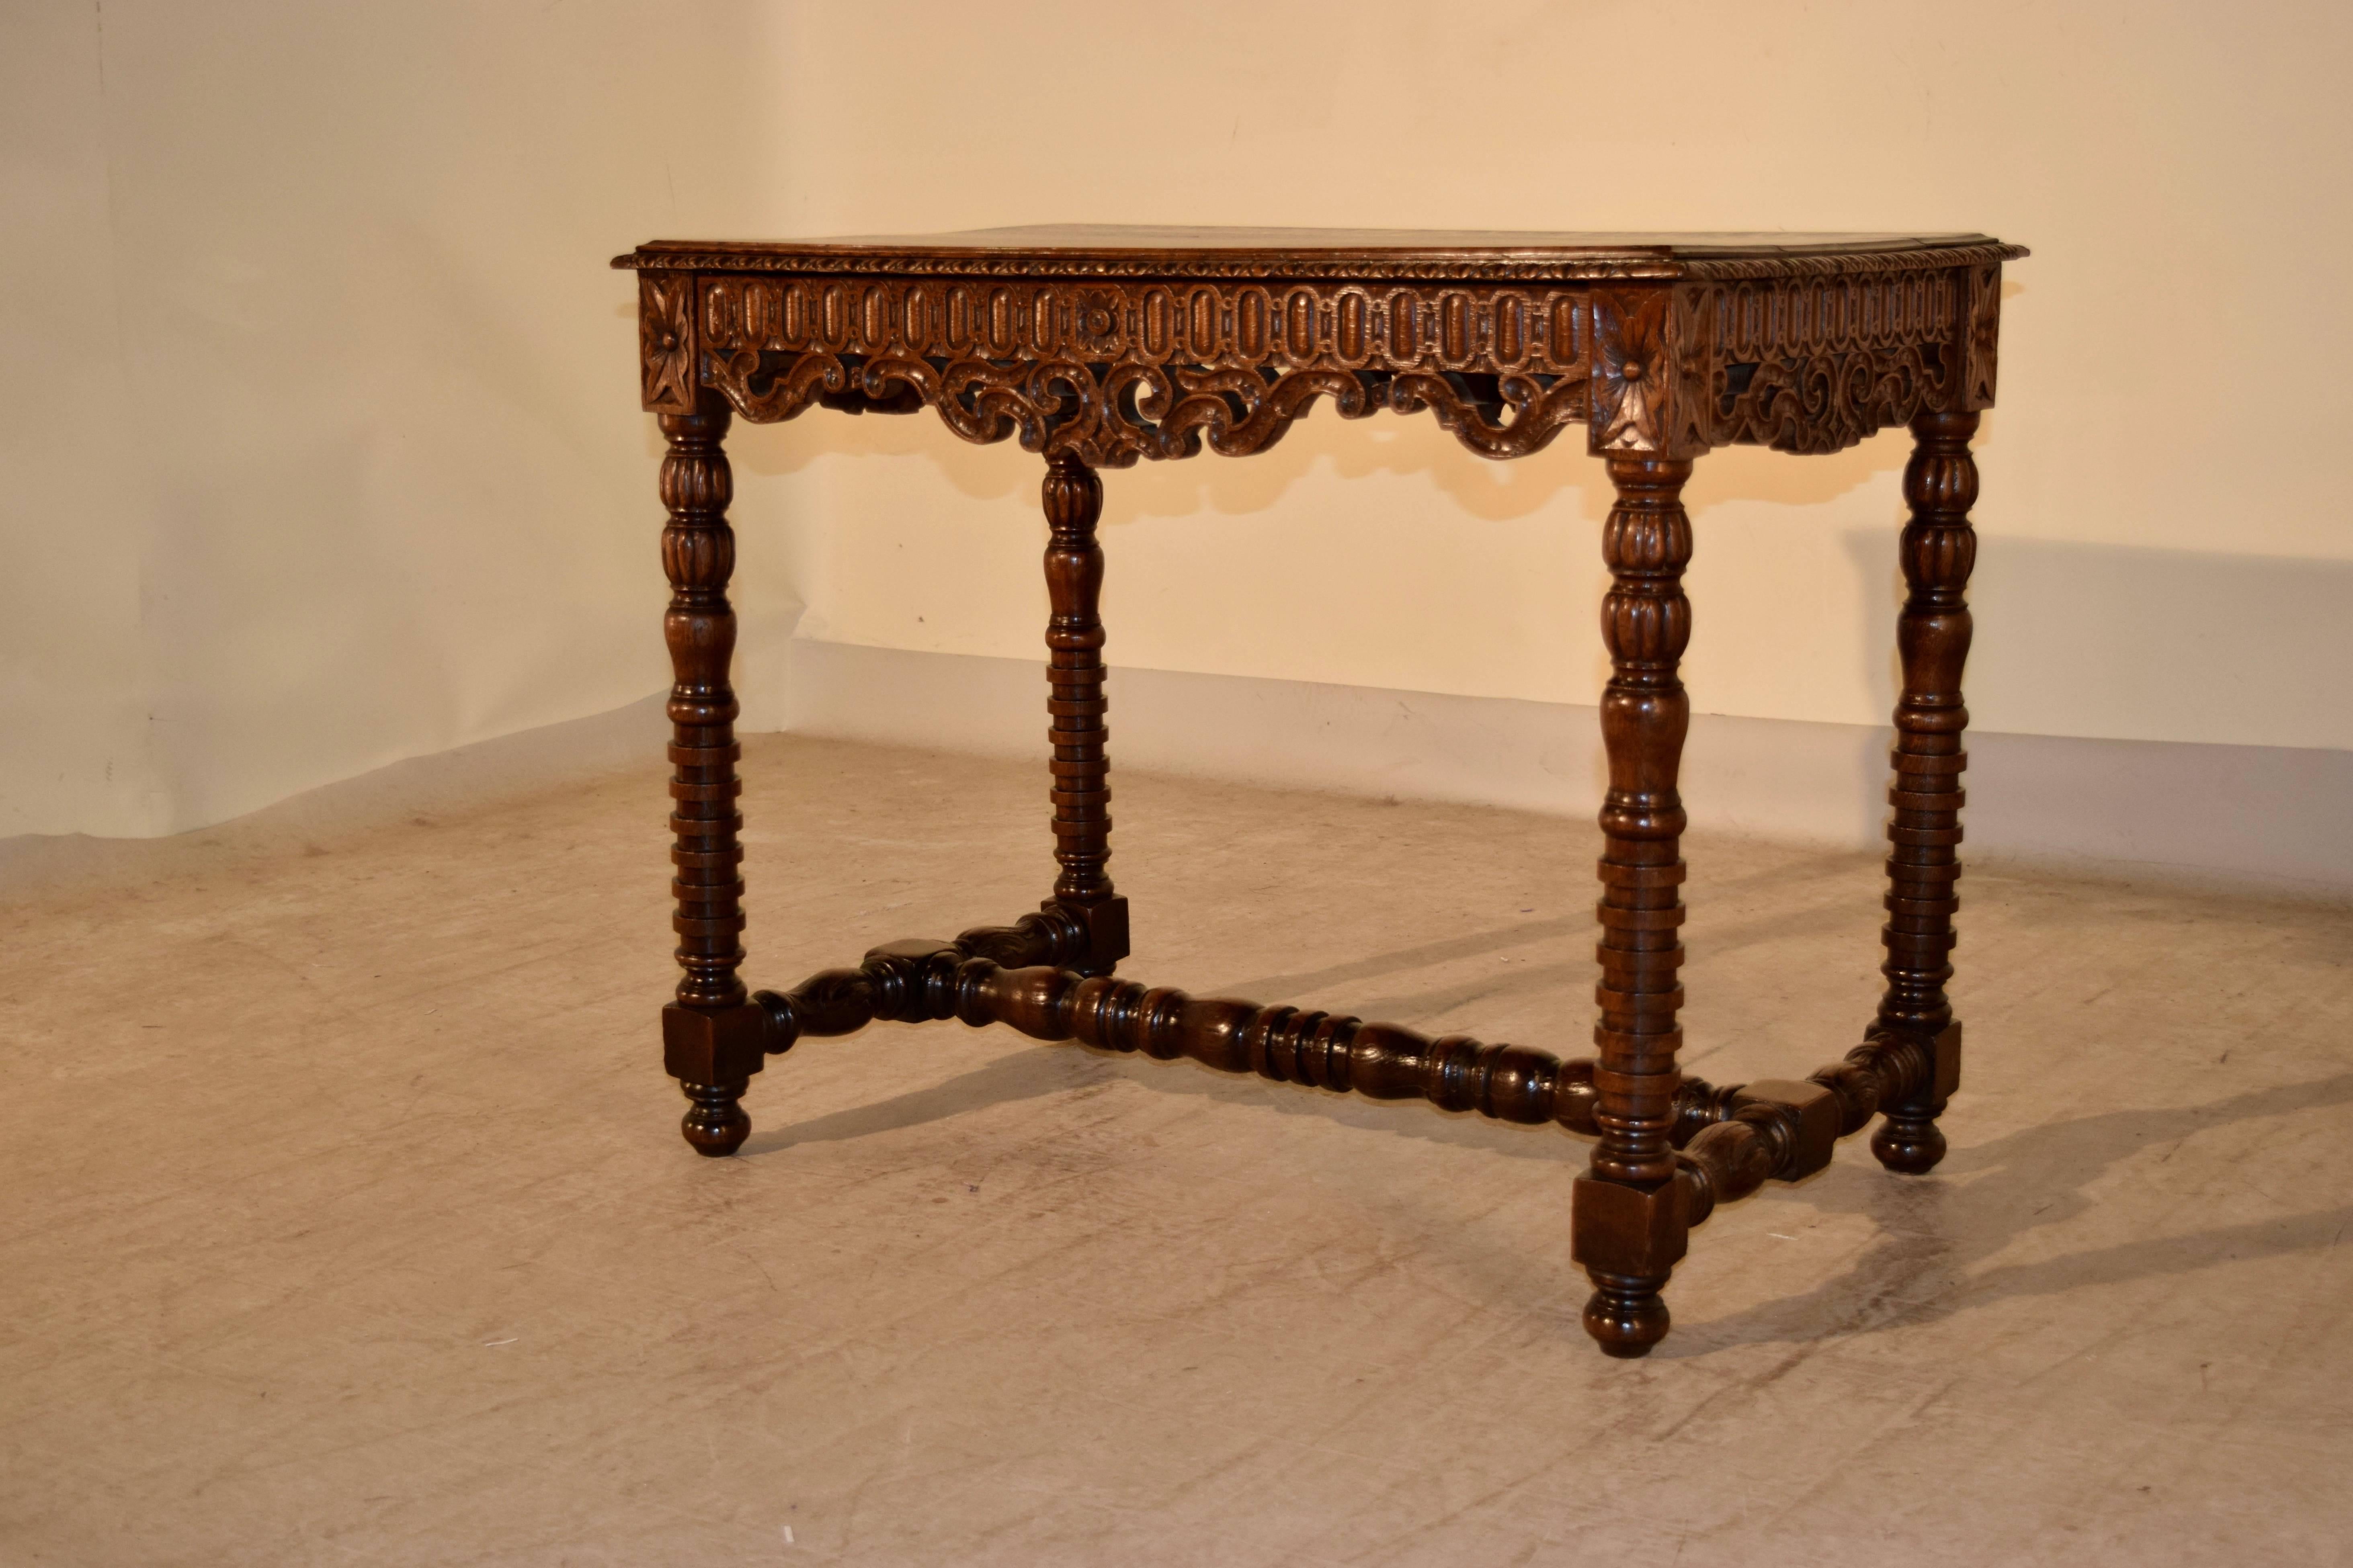 19th century French side table made from oak with a beveled and gadrooned edge around the top, following down to carved and pierced decorated aprons on three sides with a concealed drawer in the front. The piece is supported on hand-carved and